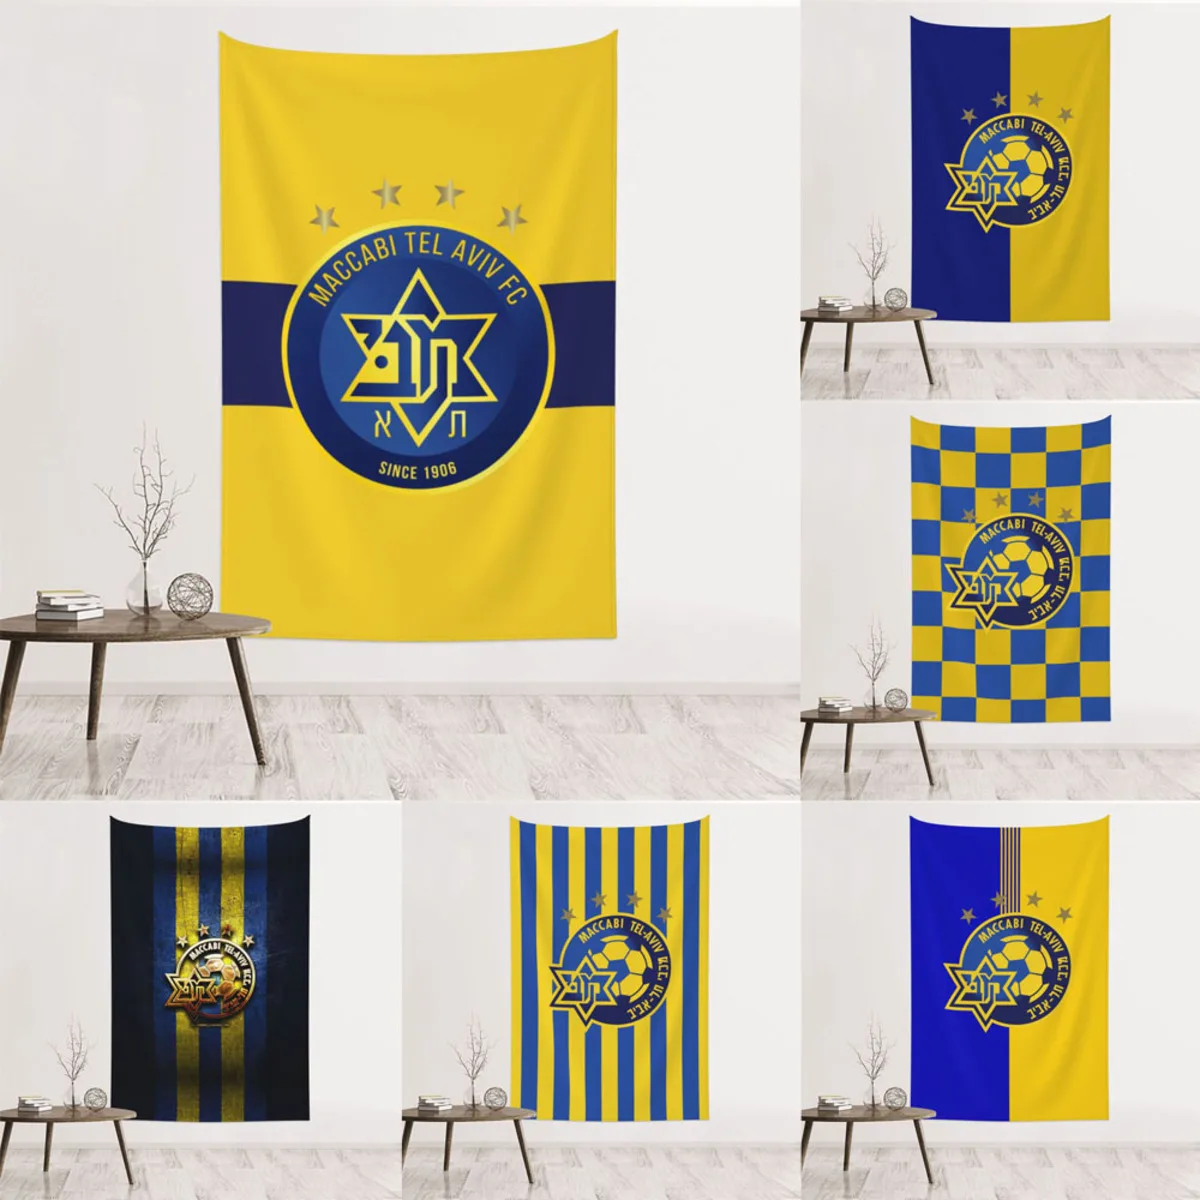 

Israel Maccabi Tel Aviv Fc Tapestry Hanging Living Room Bedroom Dorm Room Home Decor 60x40 Inches, One Size